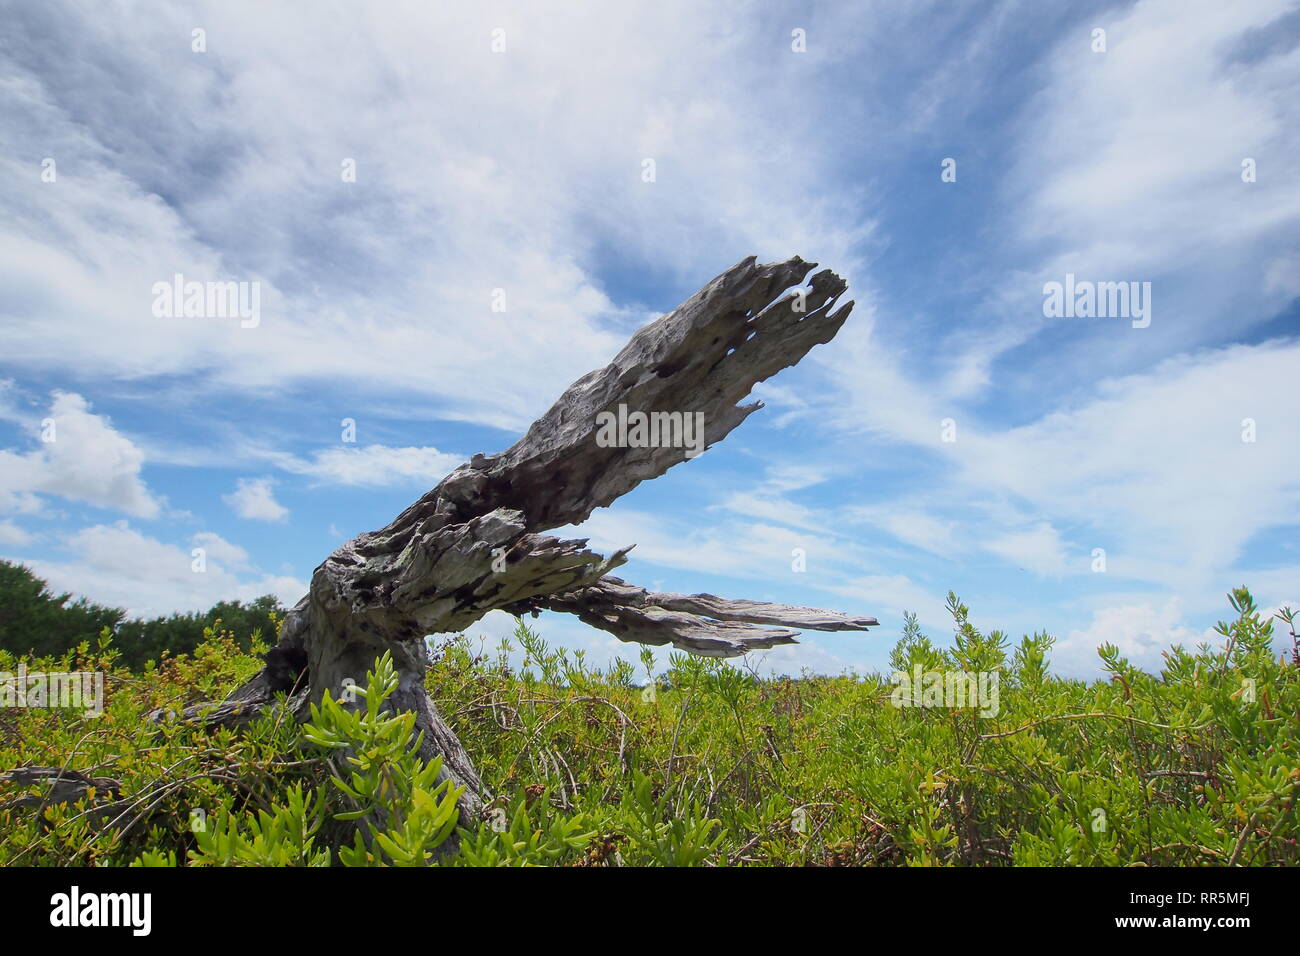 A weathered snag reminiscent of alligator jaws in the saltwort fields of the Coastal Paririe in Everglades National Park, Florida. Stock Photo